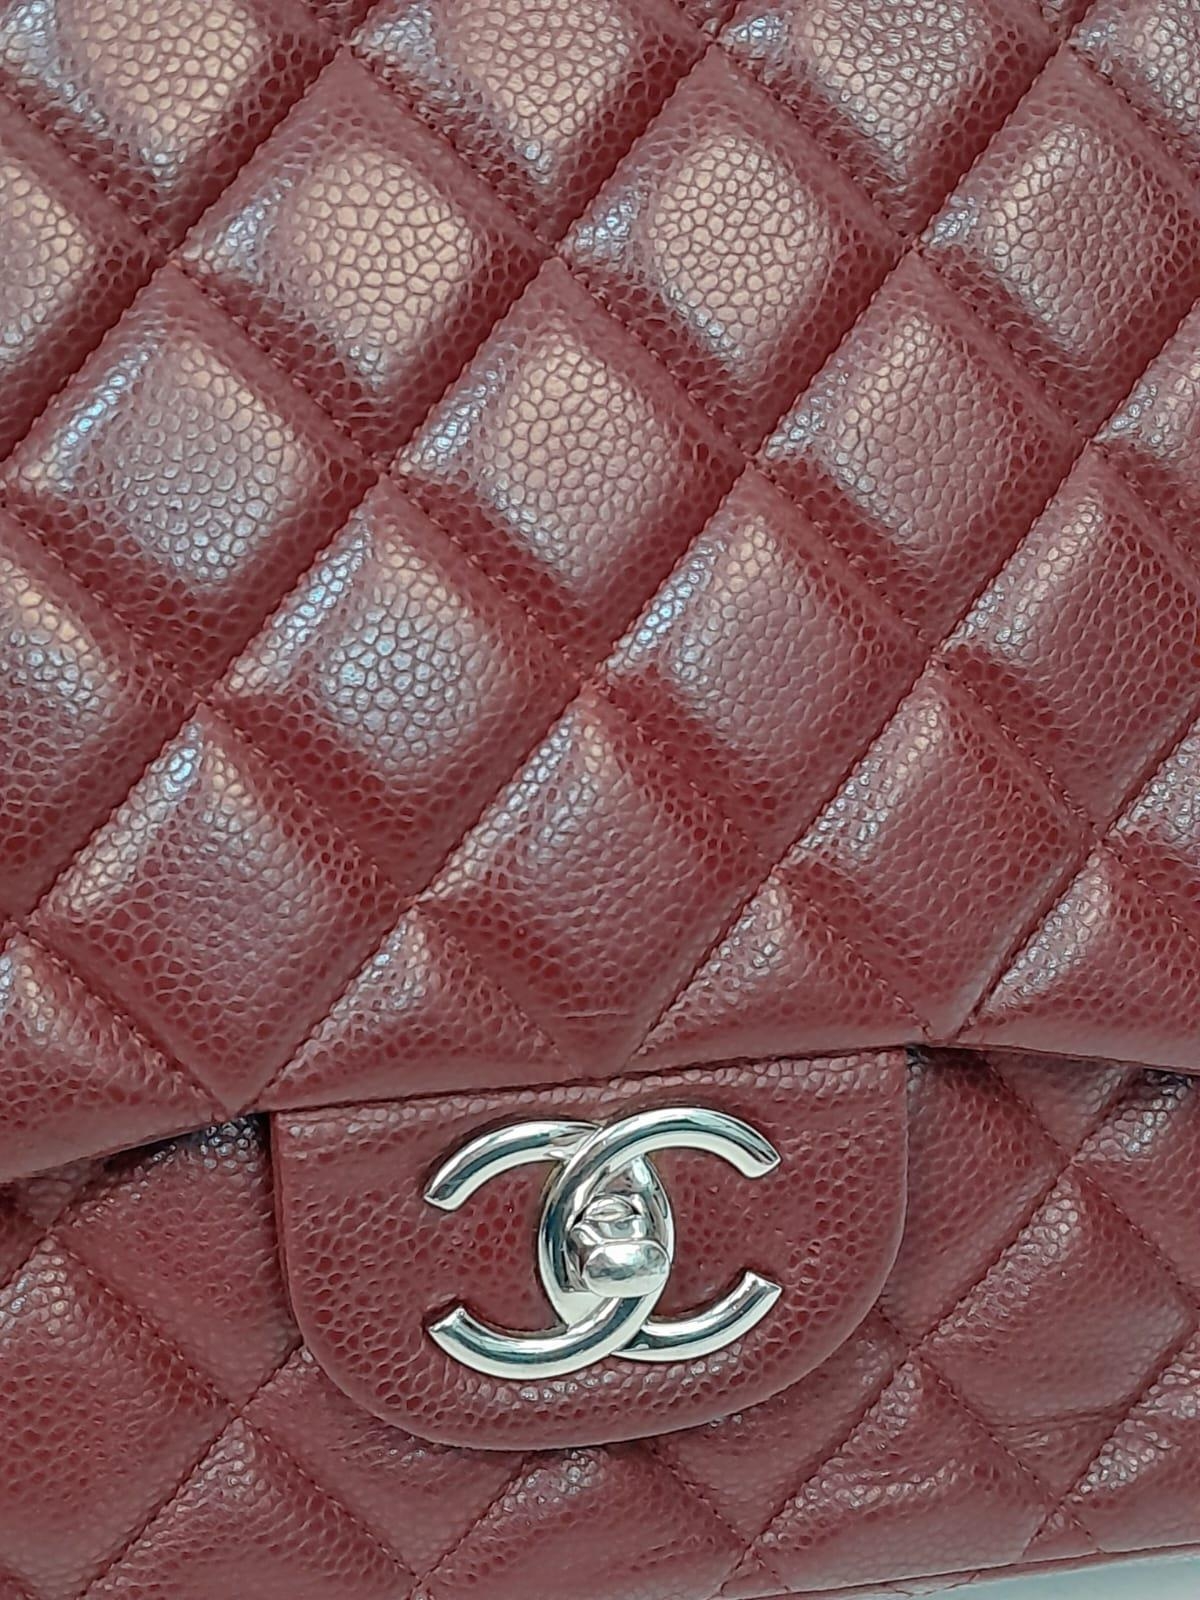 A Chanel Burgundy Jumbo Classic Double Flap Bag. Quilted leather exterior with silver-toned - Image 12 of 16